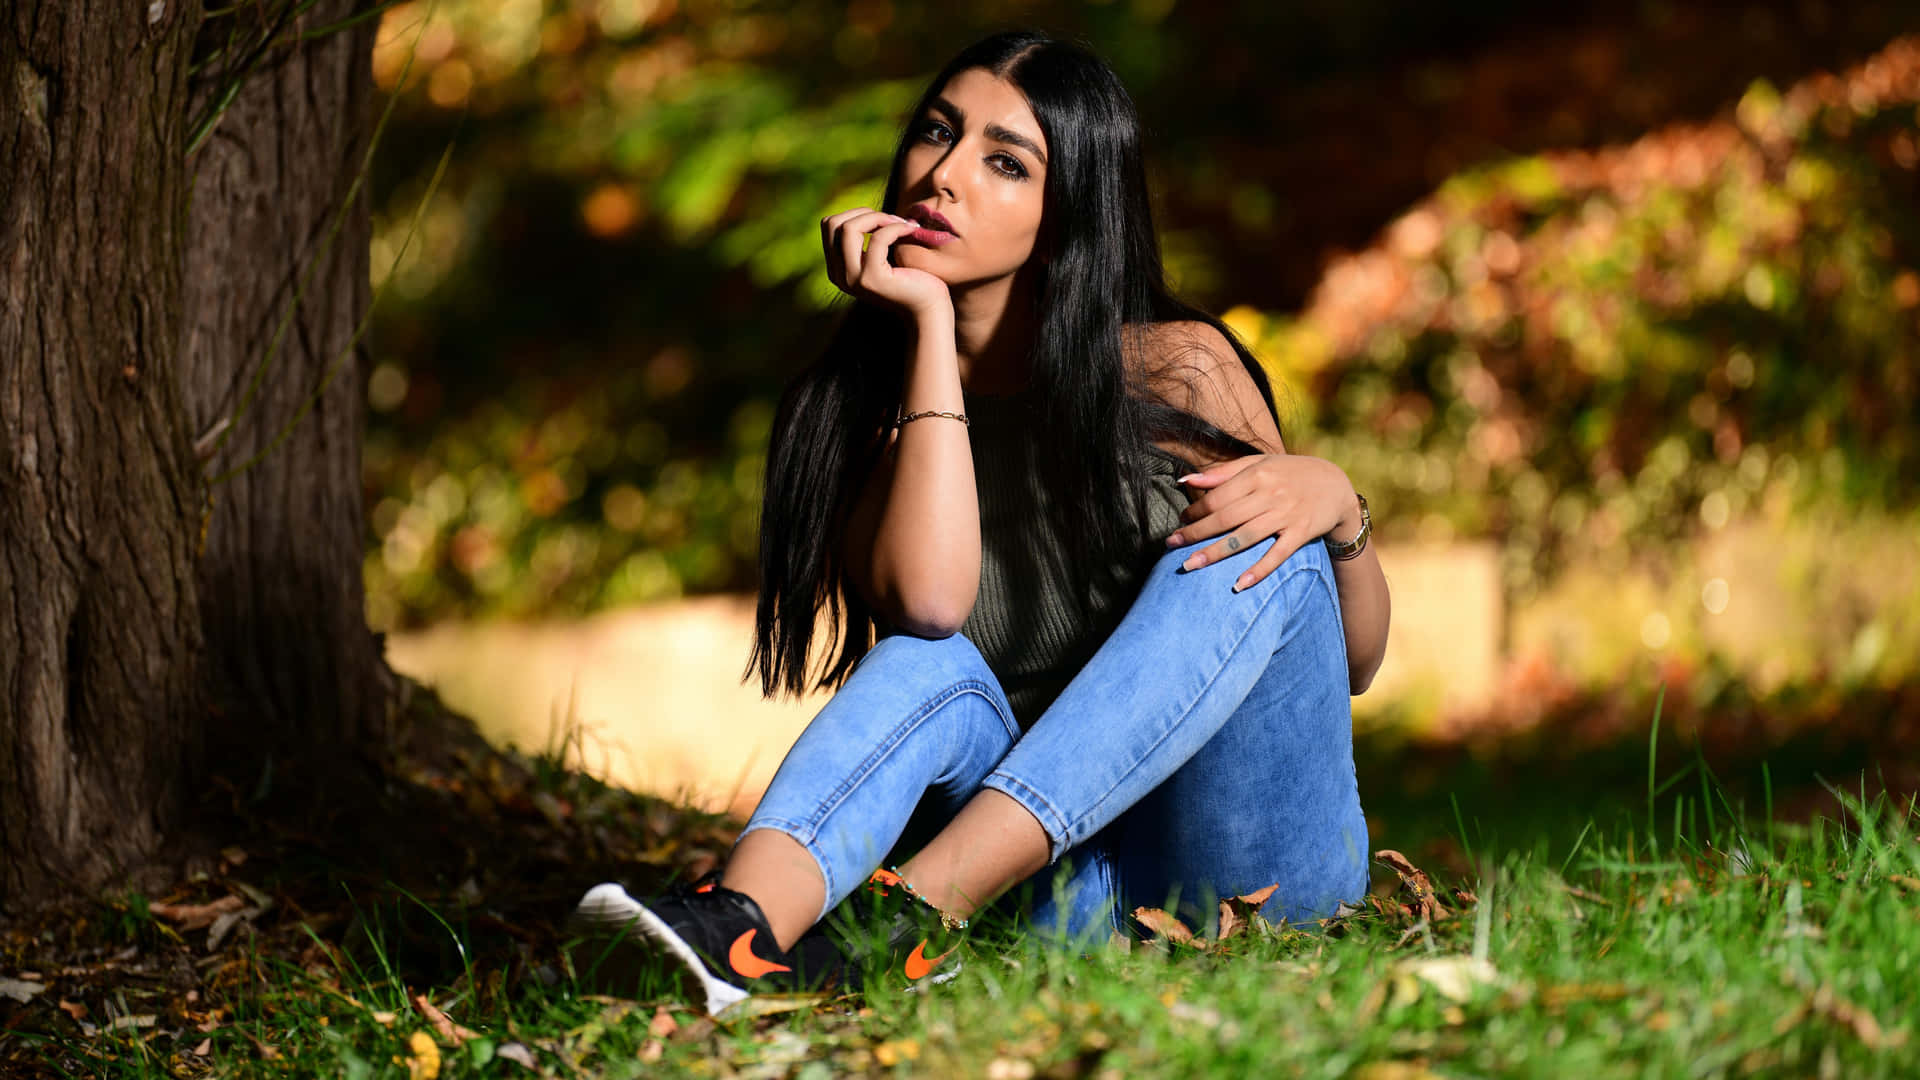 Girl In Jeans Pictures 5120 X 2880 Picture